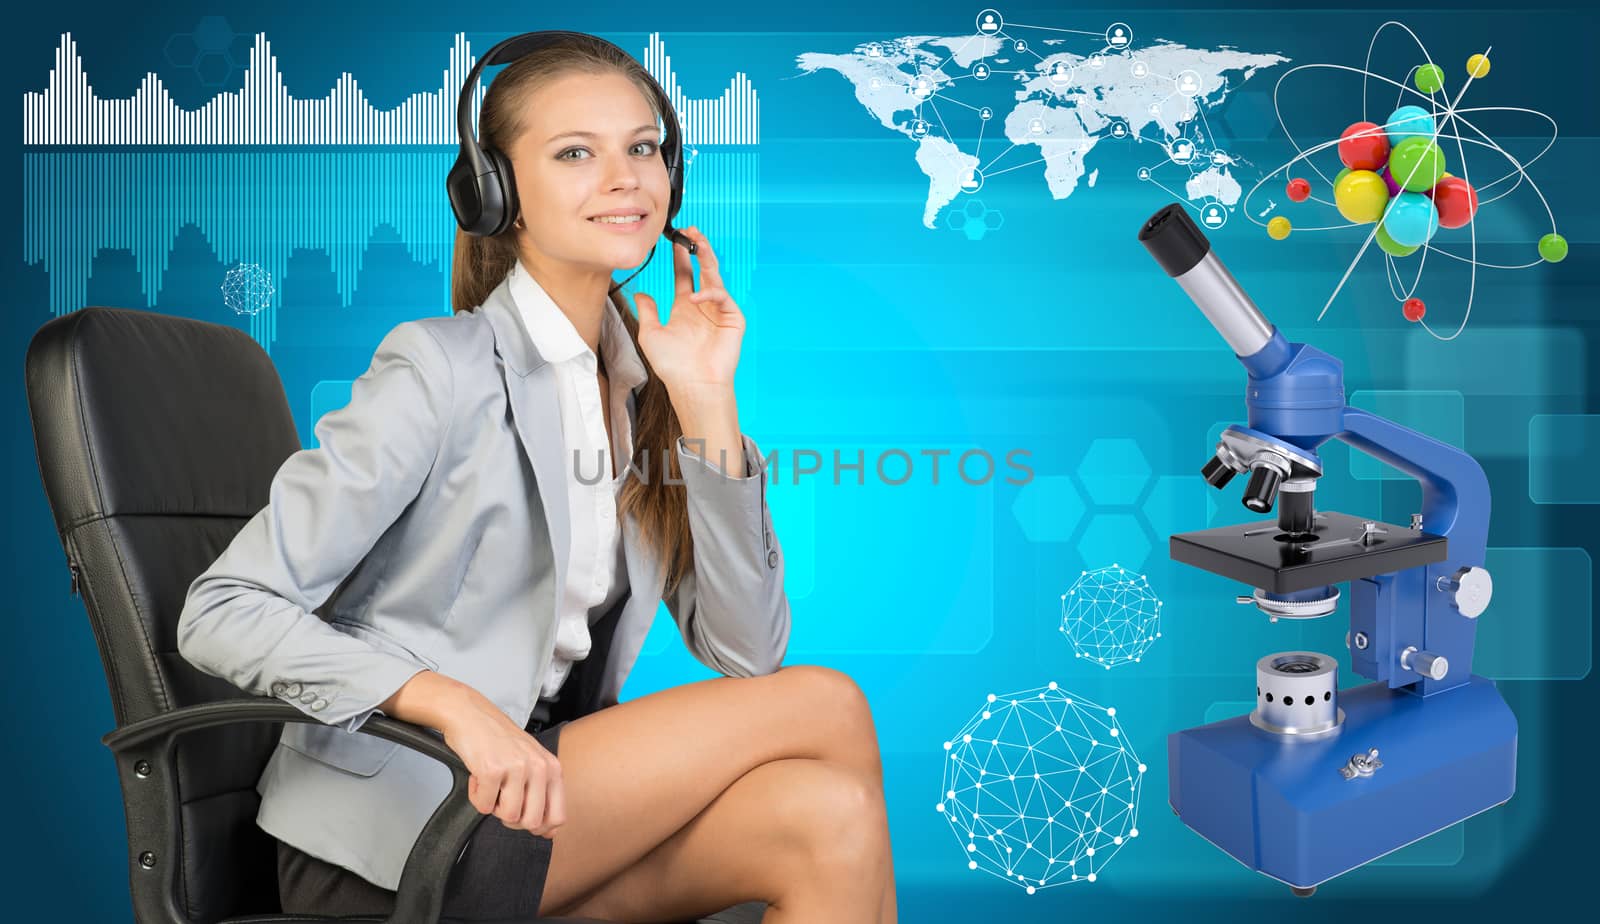 Businesswoman in headset, sitting on office chair, her hand on microphone, looking at camera, smiling. Atom model and microscope beside. World map, diagram and other virtual elements as backdrop.